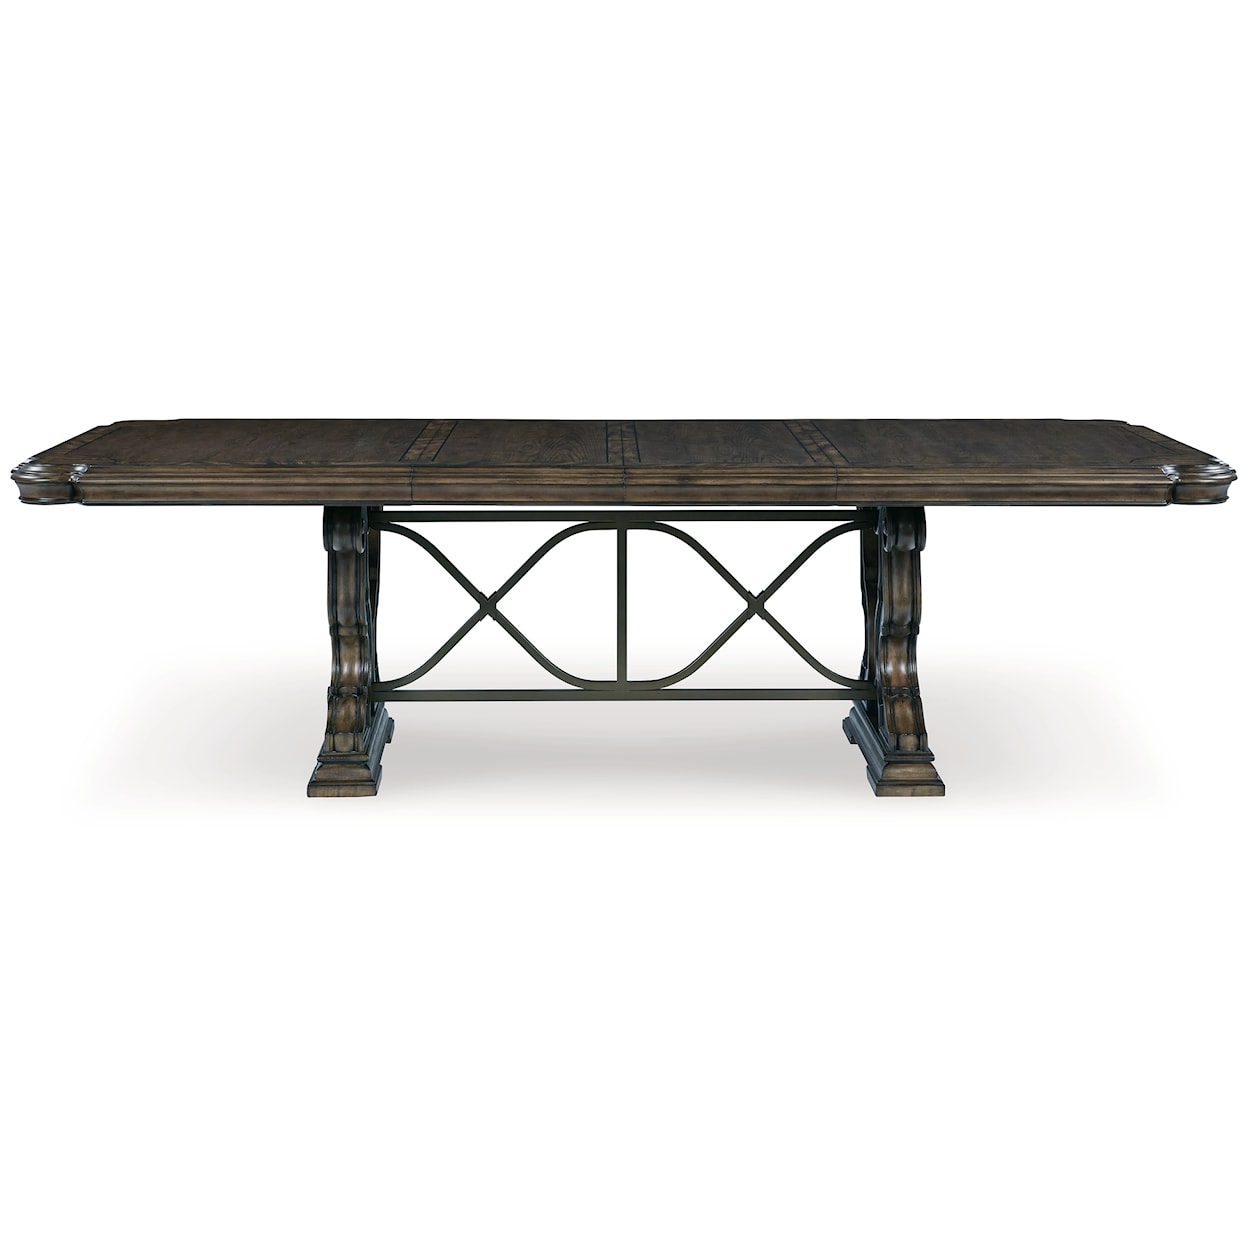 Michael Alan Select Maylee Dining Extension Table